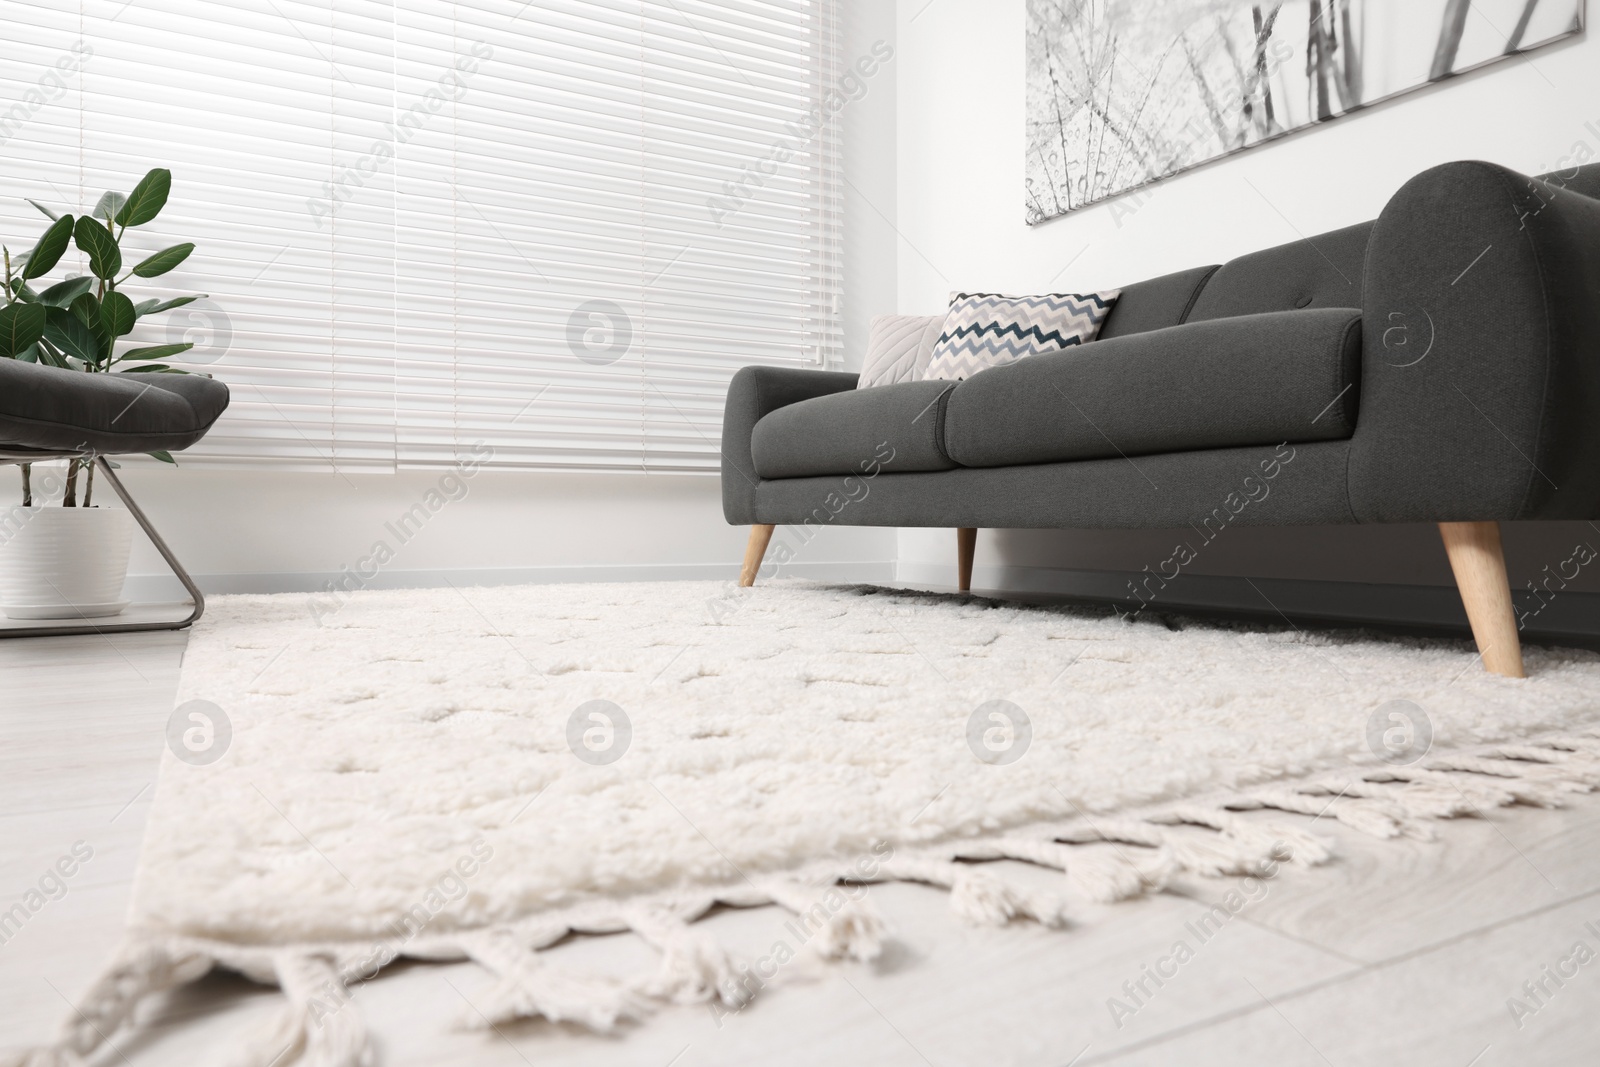 Photo of Soft carpet and stylish sofa in living room, low angle view. Modern interior